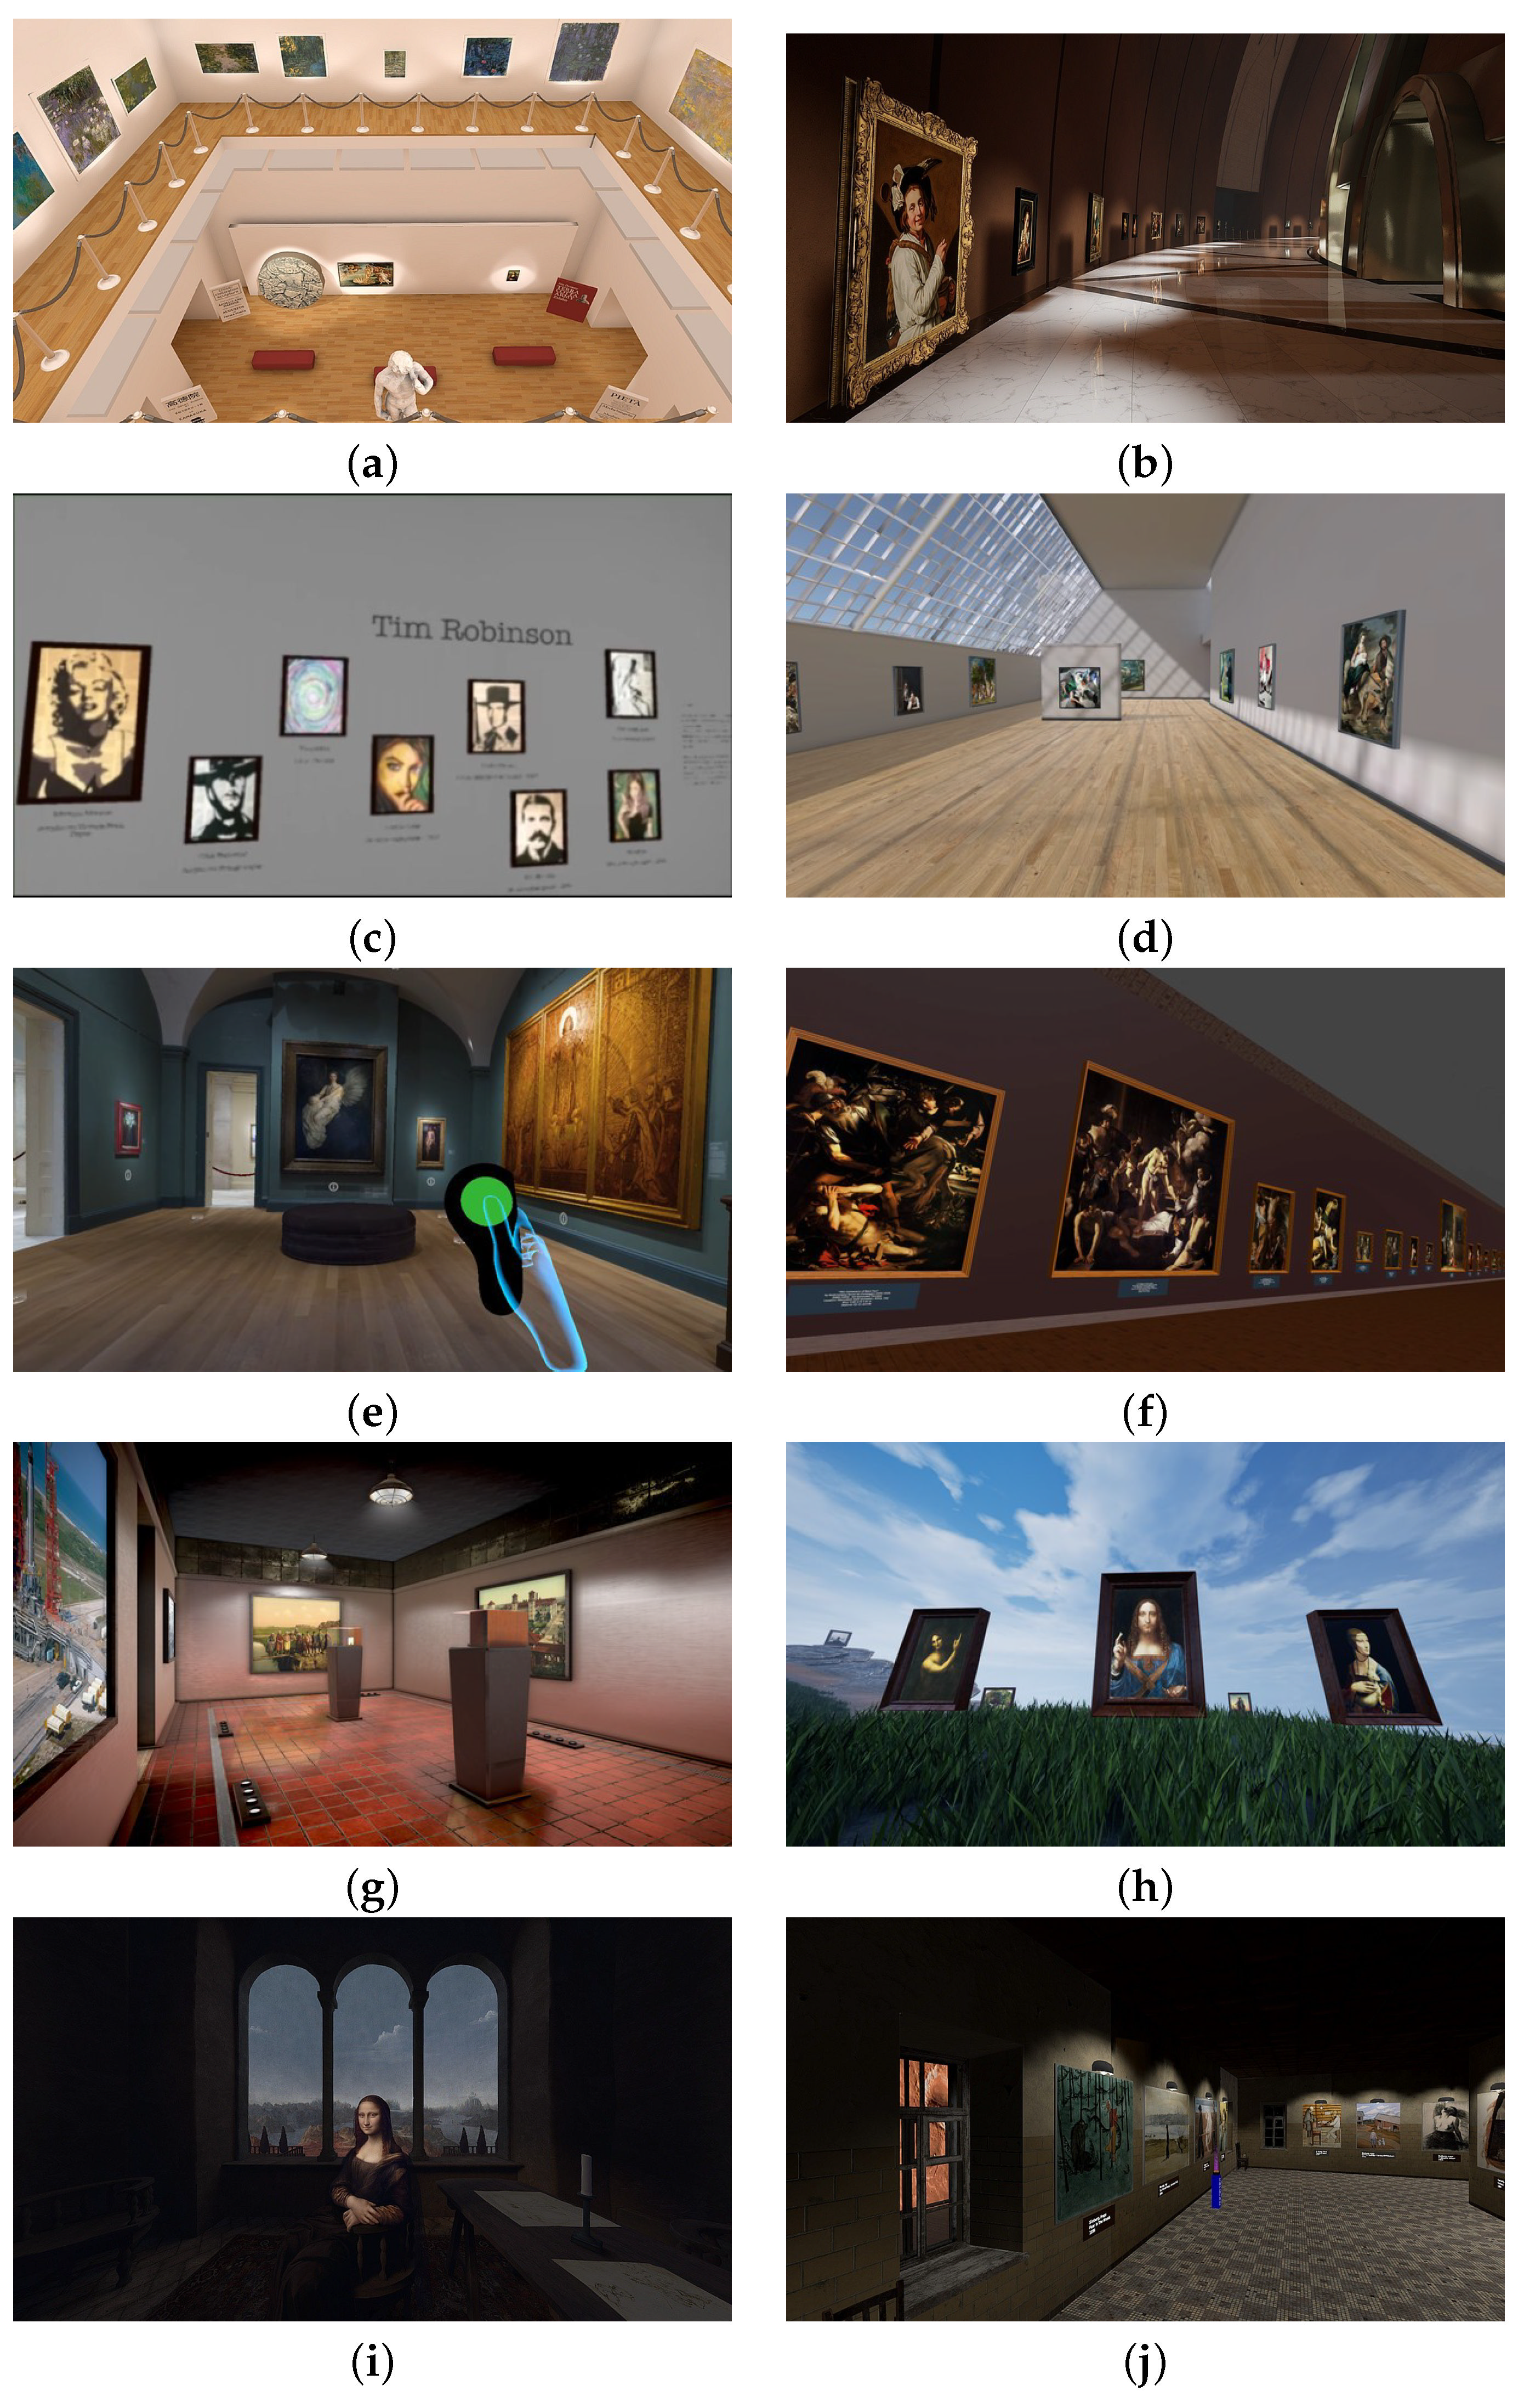 Projects and Presentation: Using a Virtual Gallery to Display